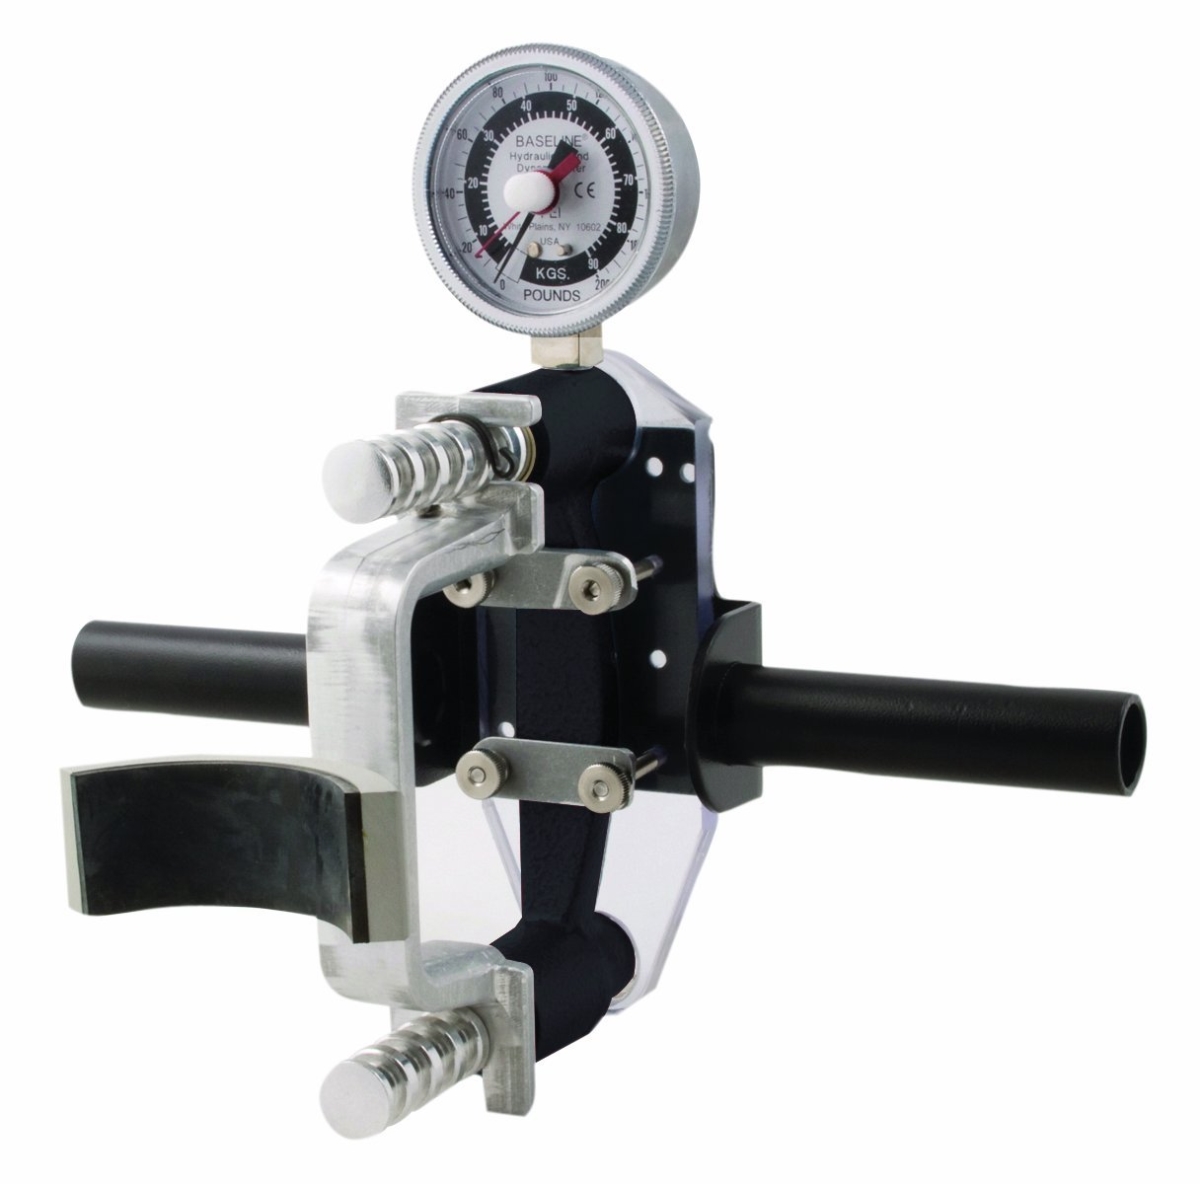 Picture of Baseline 12-0595 200 lbs MMT & Hand Hydraulic HD Push Attachments Dynamometer with 2-Handle Grip